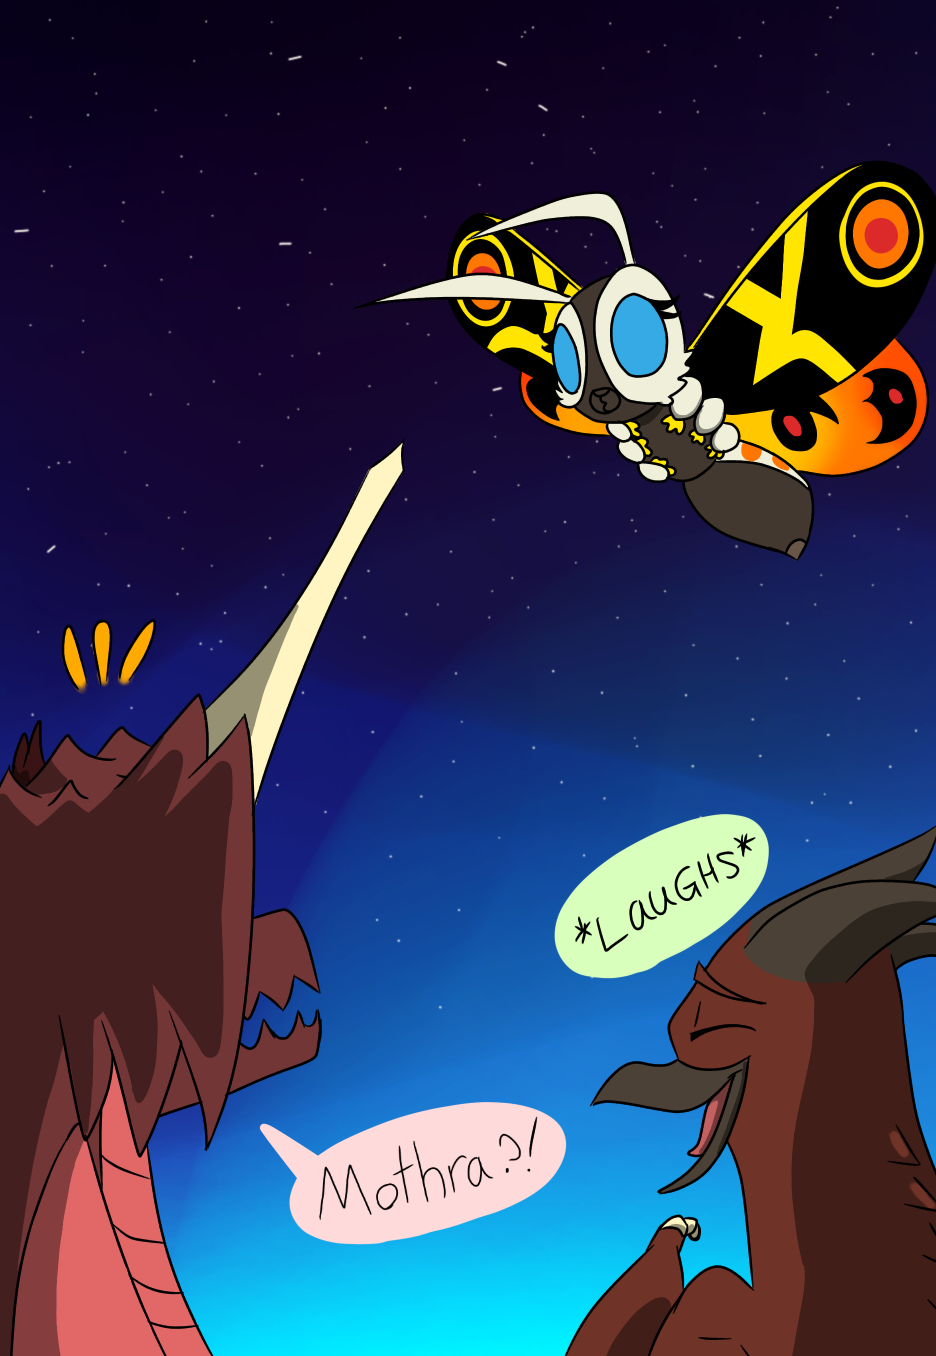 Here comes Mothra